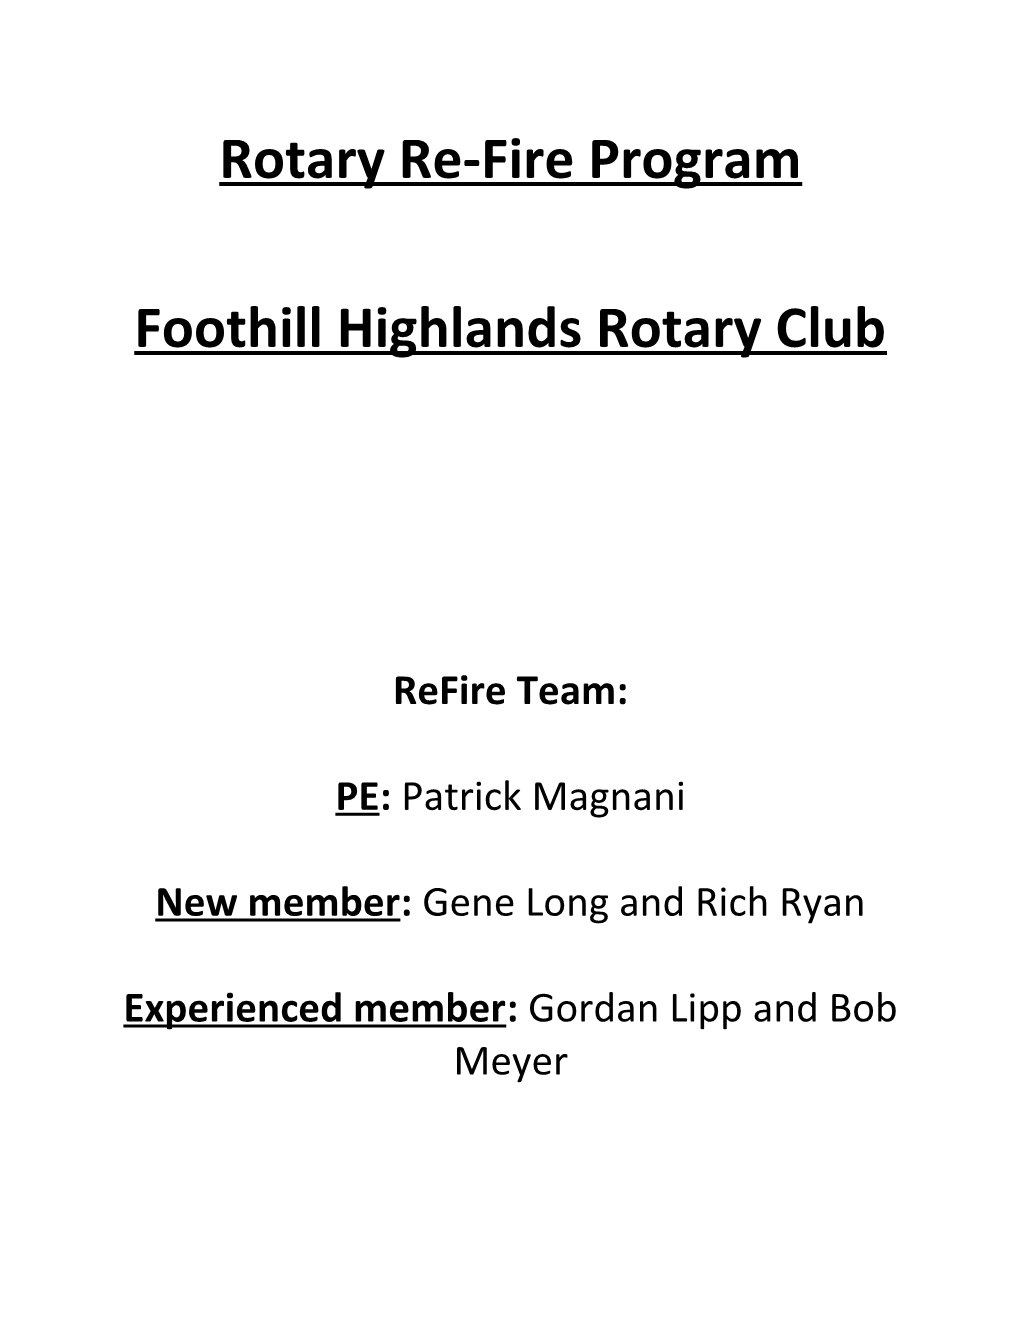 Foothill Highlands Rotary Club